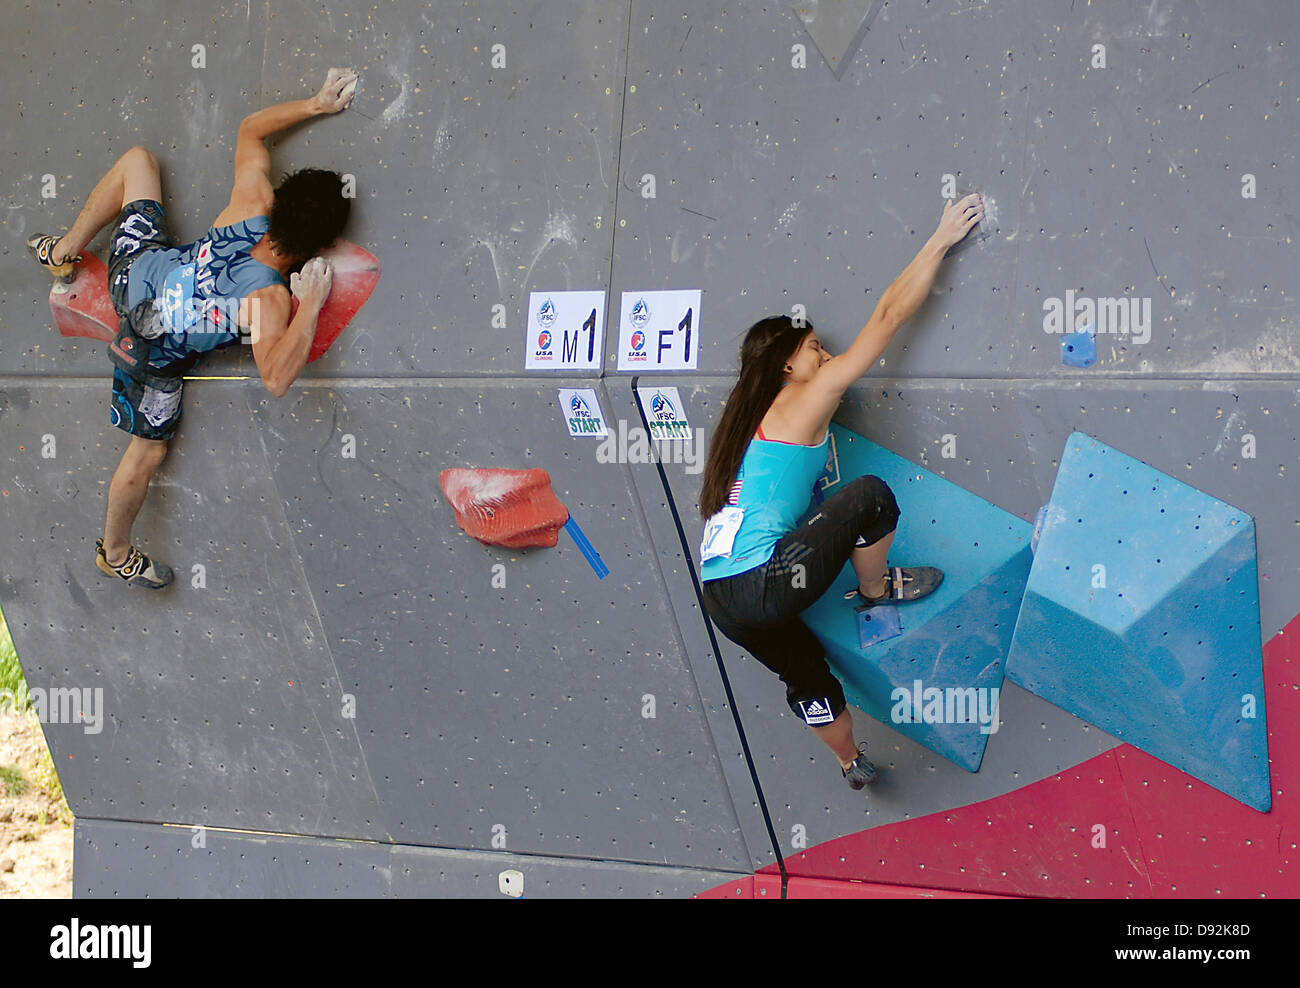 Vail, Colorado, USA. June 8, 2013: Japan's, Shinta Ozawa, and Team USA's, Nina Williams, work on solving a semi-final problem in men's and women's World Cup bouldering during the GoPro Mountain Games, Vail, Colorado. Adventure athletes from around the world converge on Vail, Colorado, June 6-9, for America's largest celebration of adventure sports, music and the mountain lifestyle. Credit:  Cal Sport Media/Alamy Live News Stock Photo